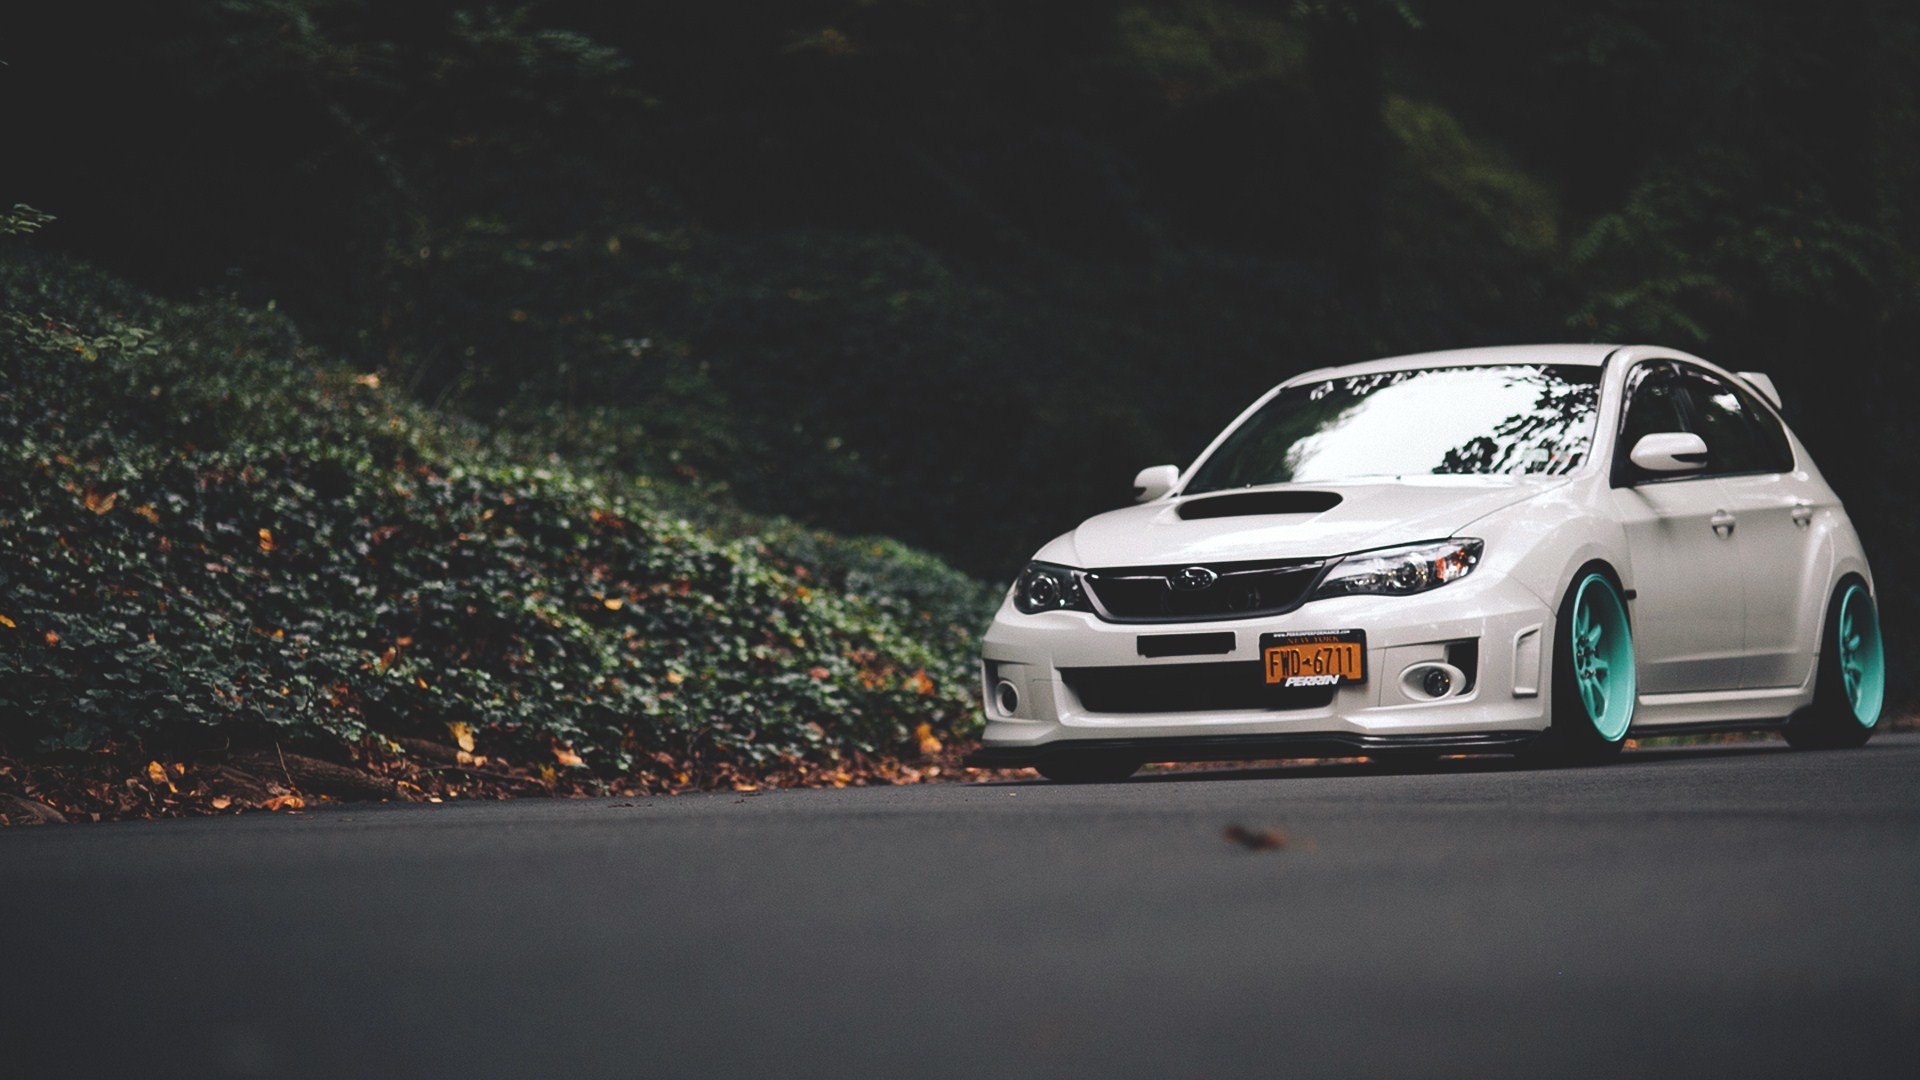 1920x1080 Subaru Wallpapers For Android